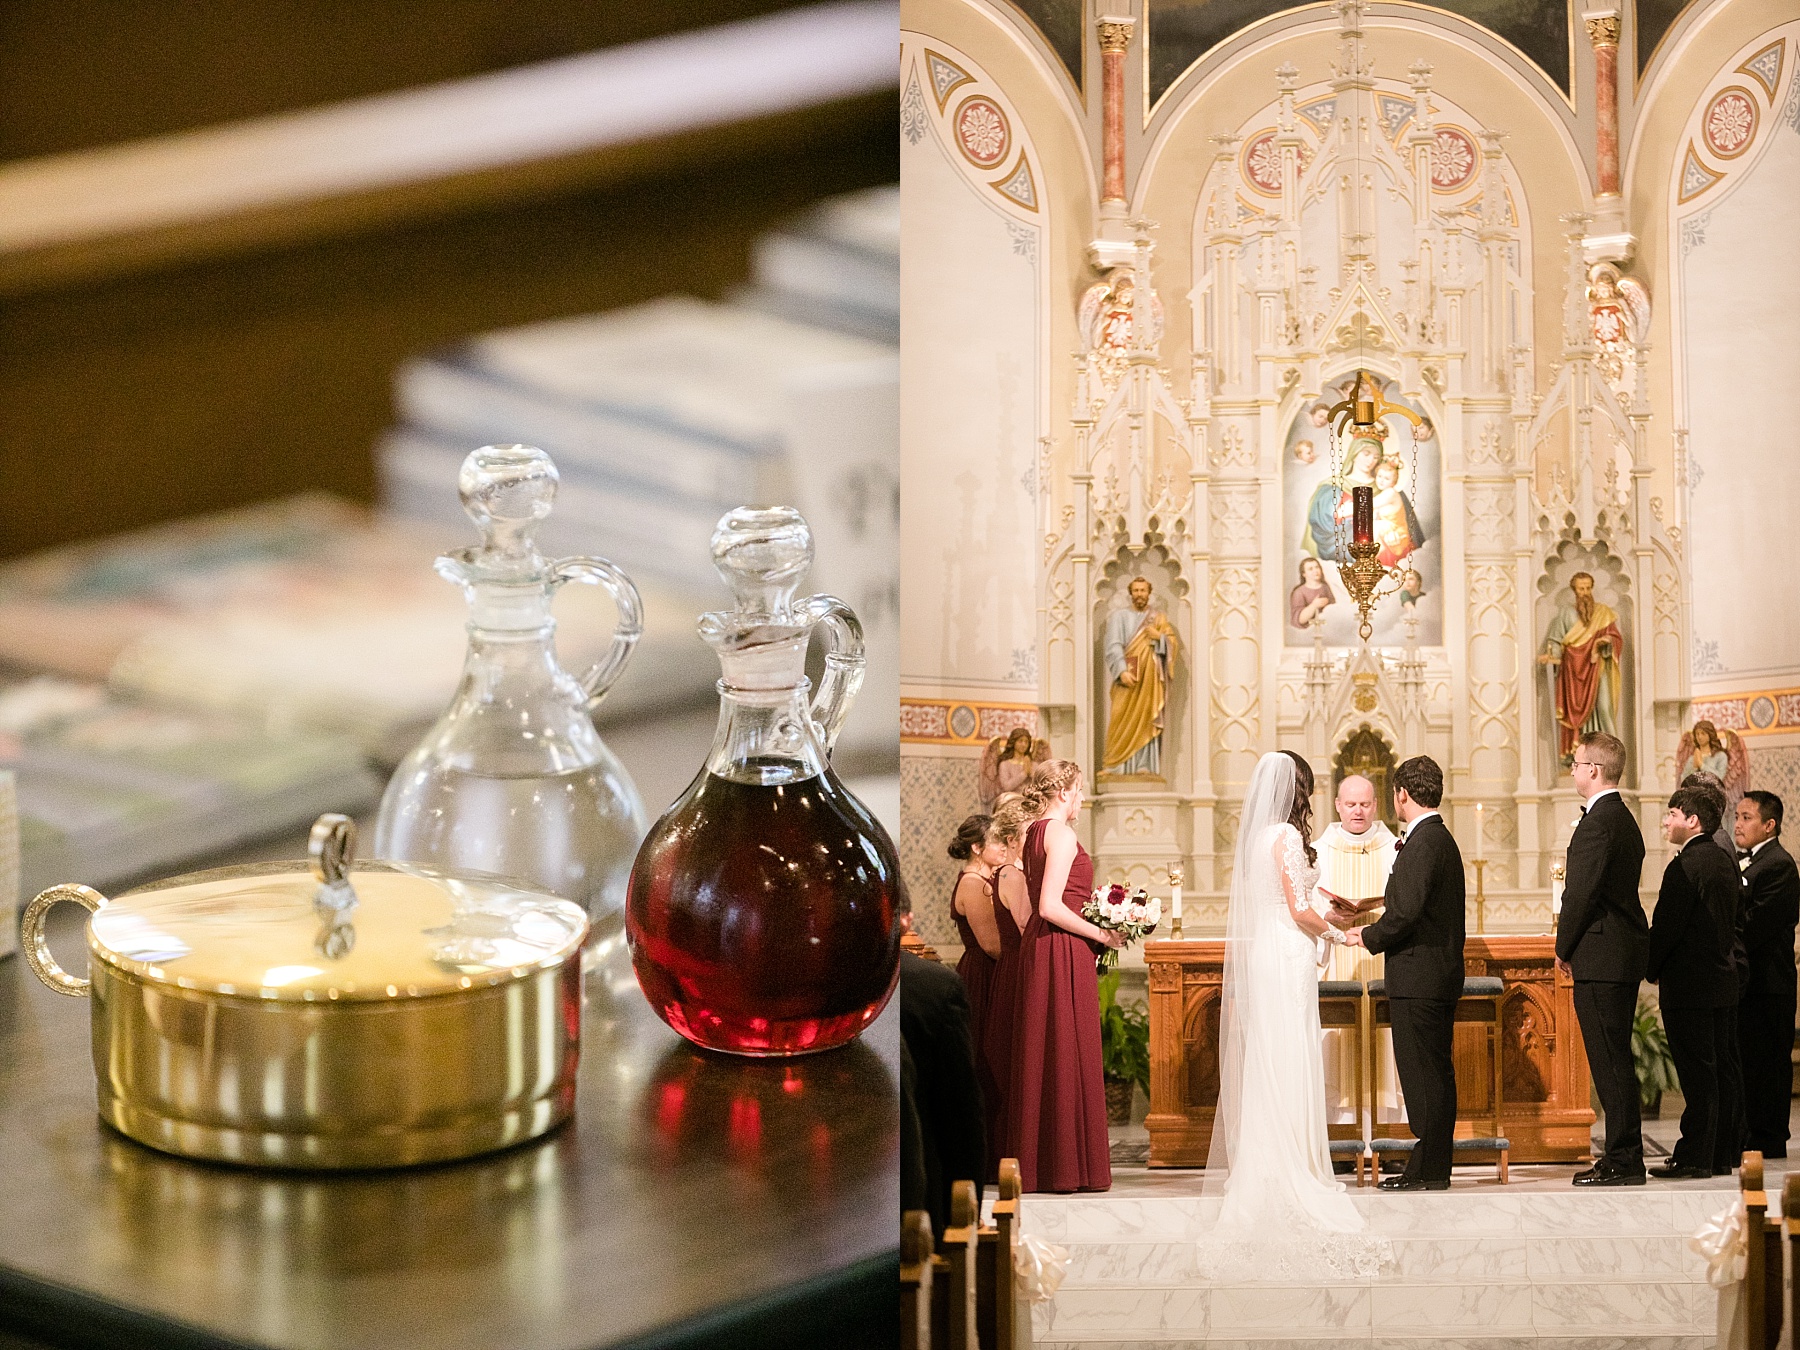 Heartfelt and classically chic, Sarah & Mack were married in the same Catholic church where his parents & grandparents had also been married.